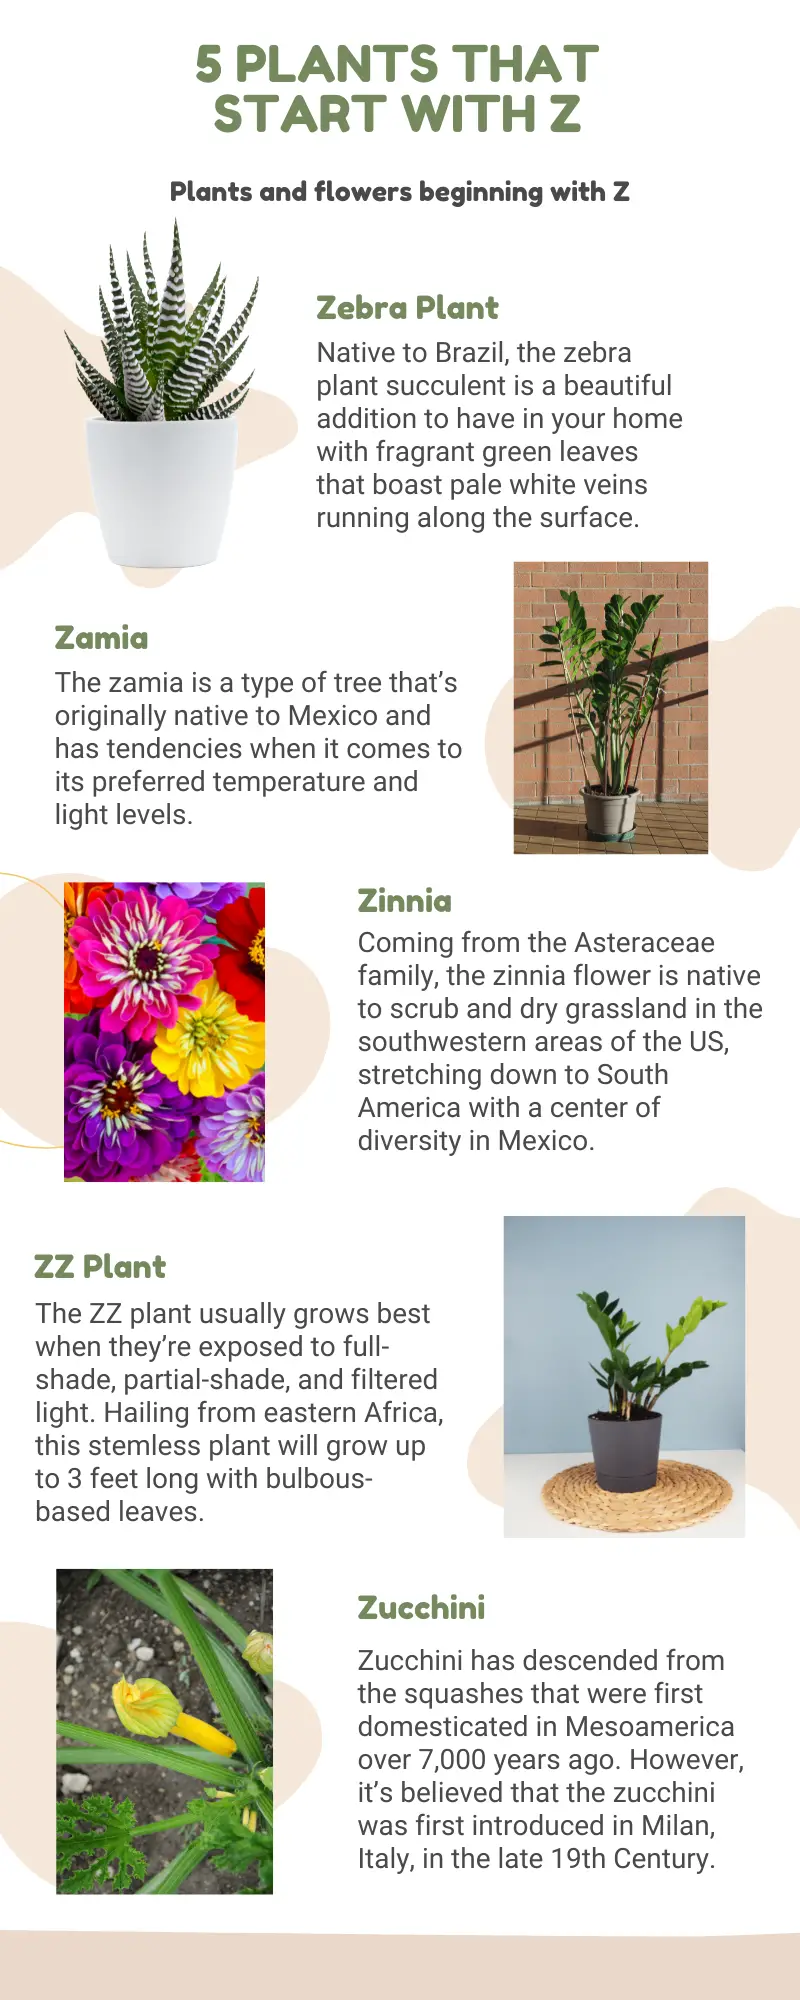 Which plants and flowers start with Z?